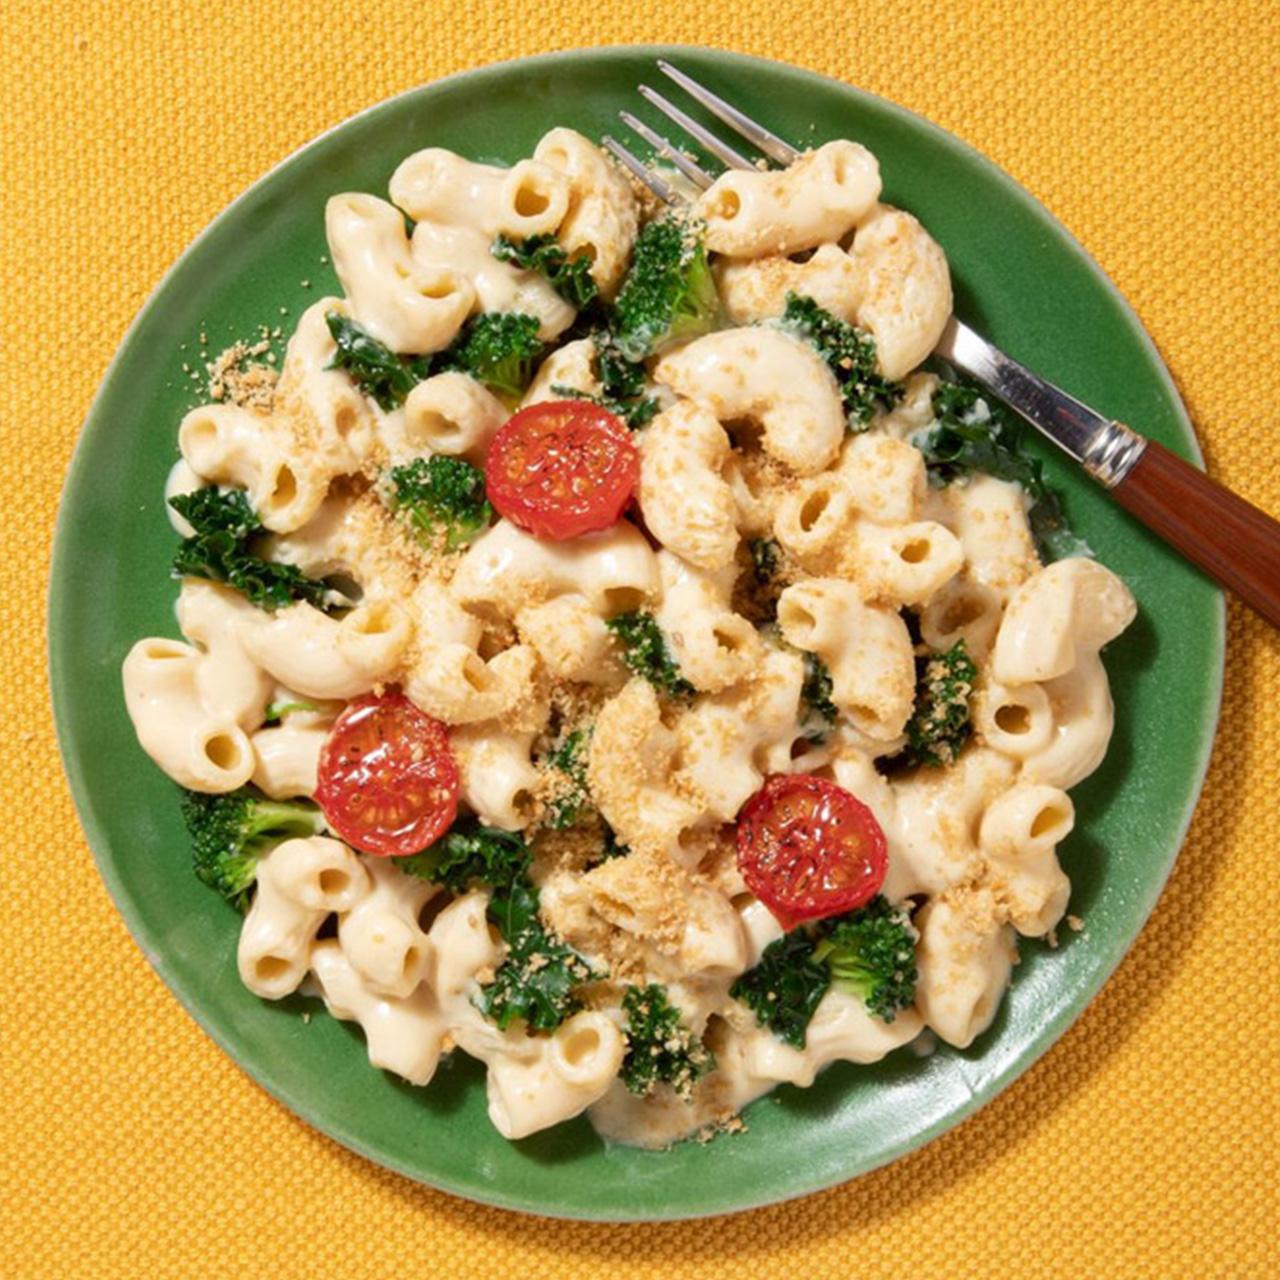 allplants Mac and Greens with Cashew Cream for 1 426g